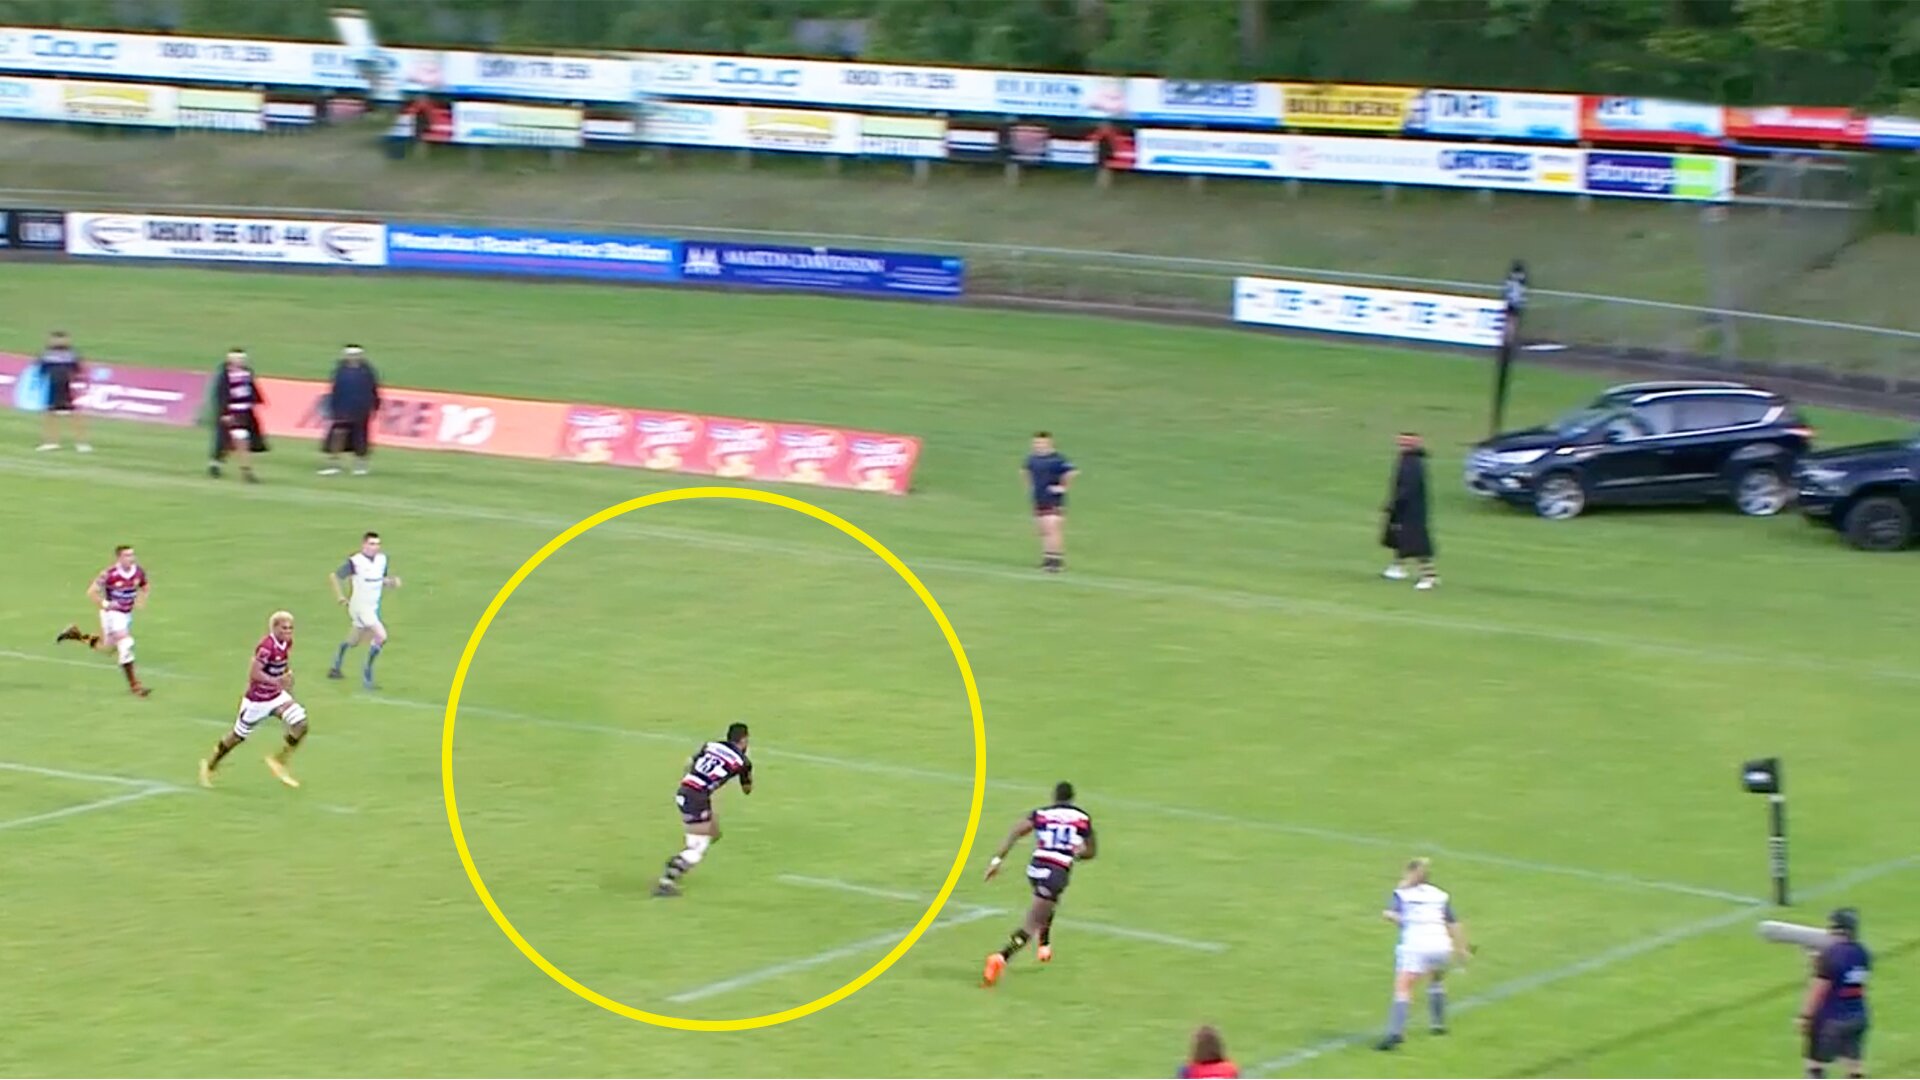 This morning's Mitre 10 Cup gave us the perfect example of how NOT to score a try